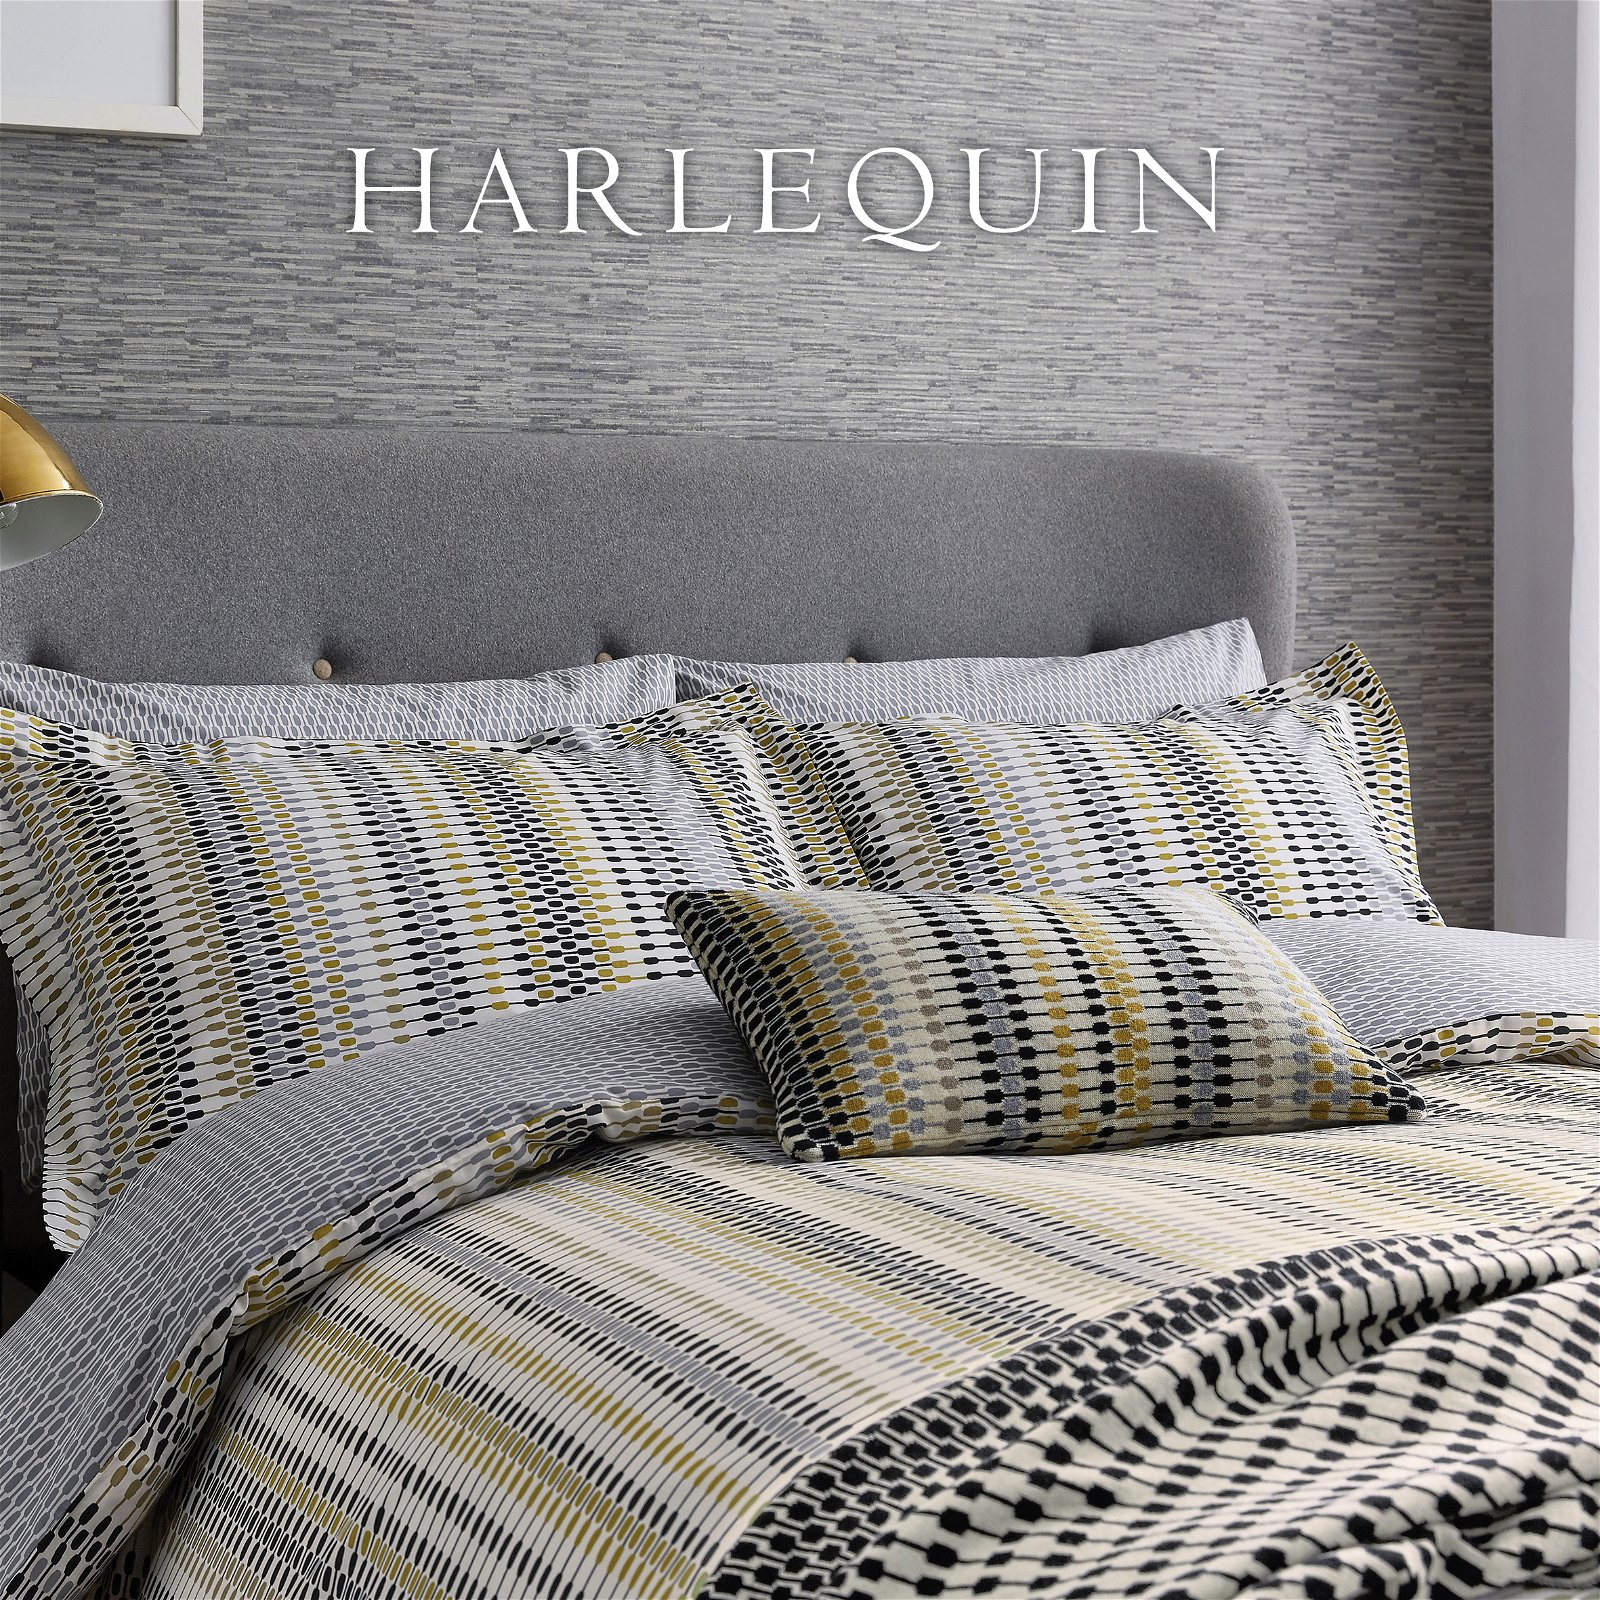 Harlequin Array Bedding in Charcoal